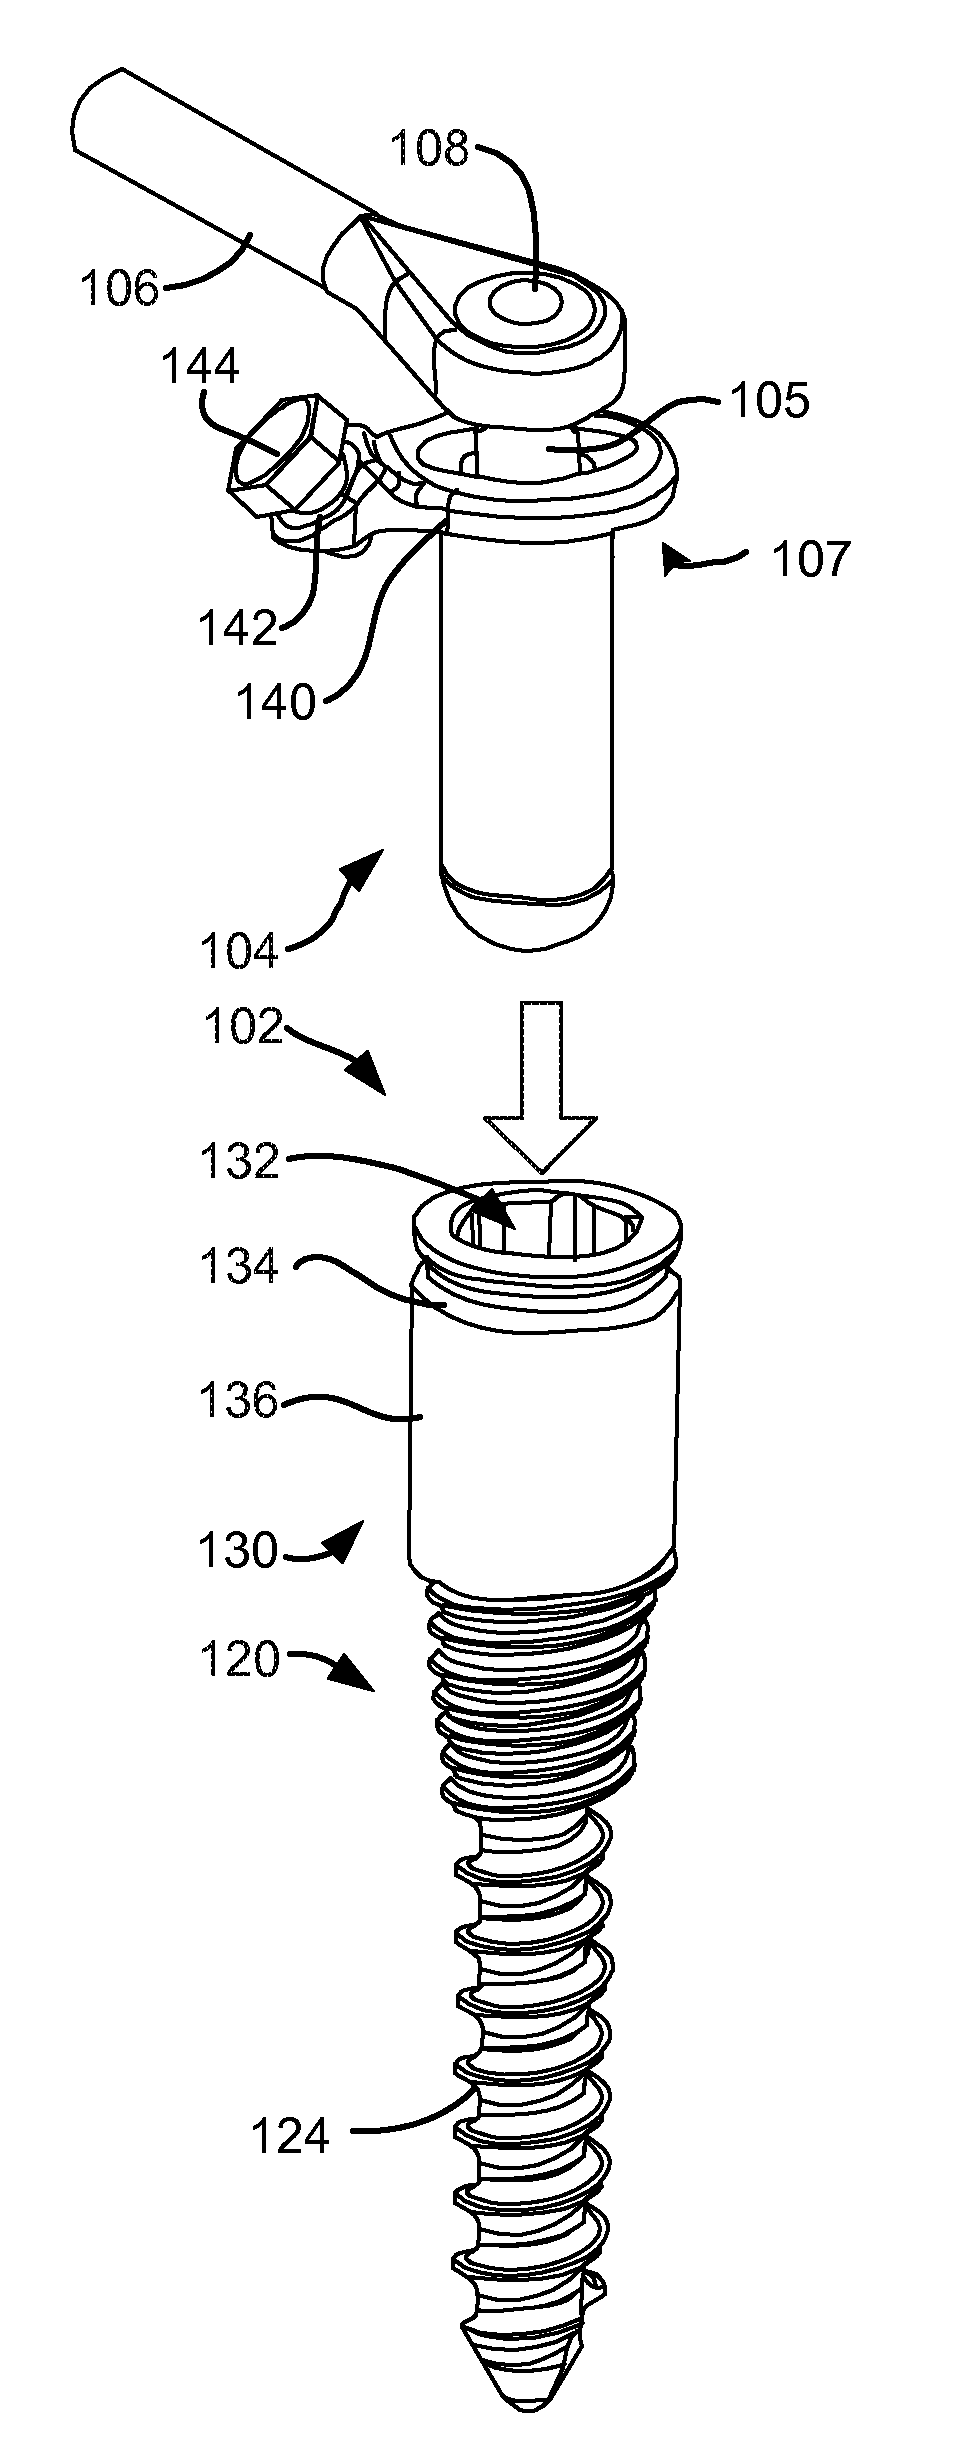 Low profile spinal prosthesis incorporating a bone anchor having a deflectable post and a compound spinal rod